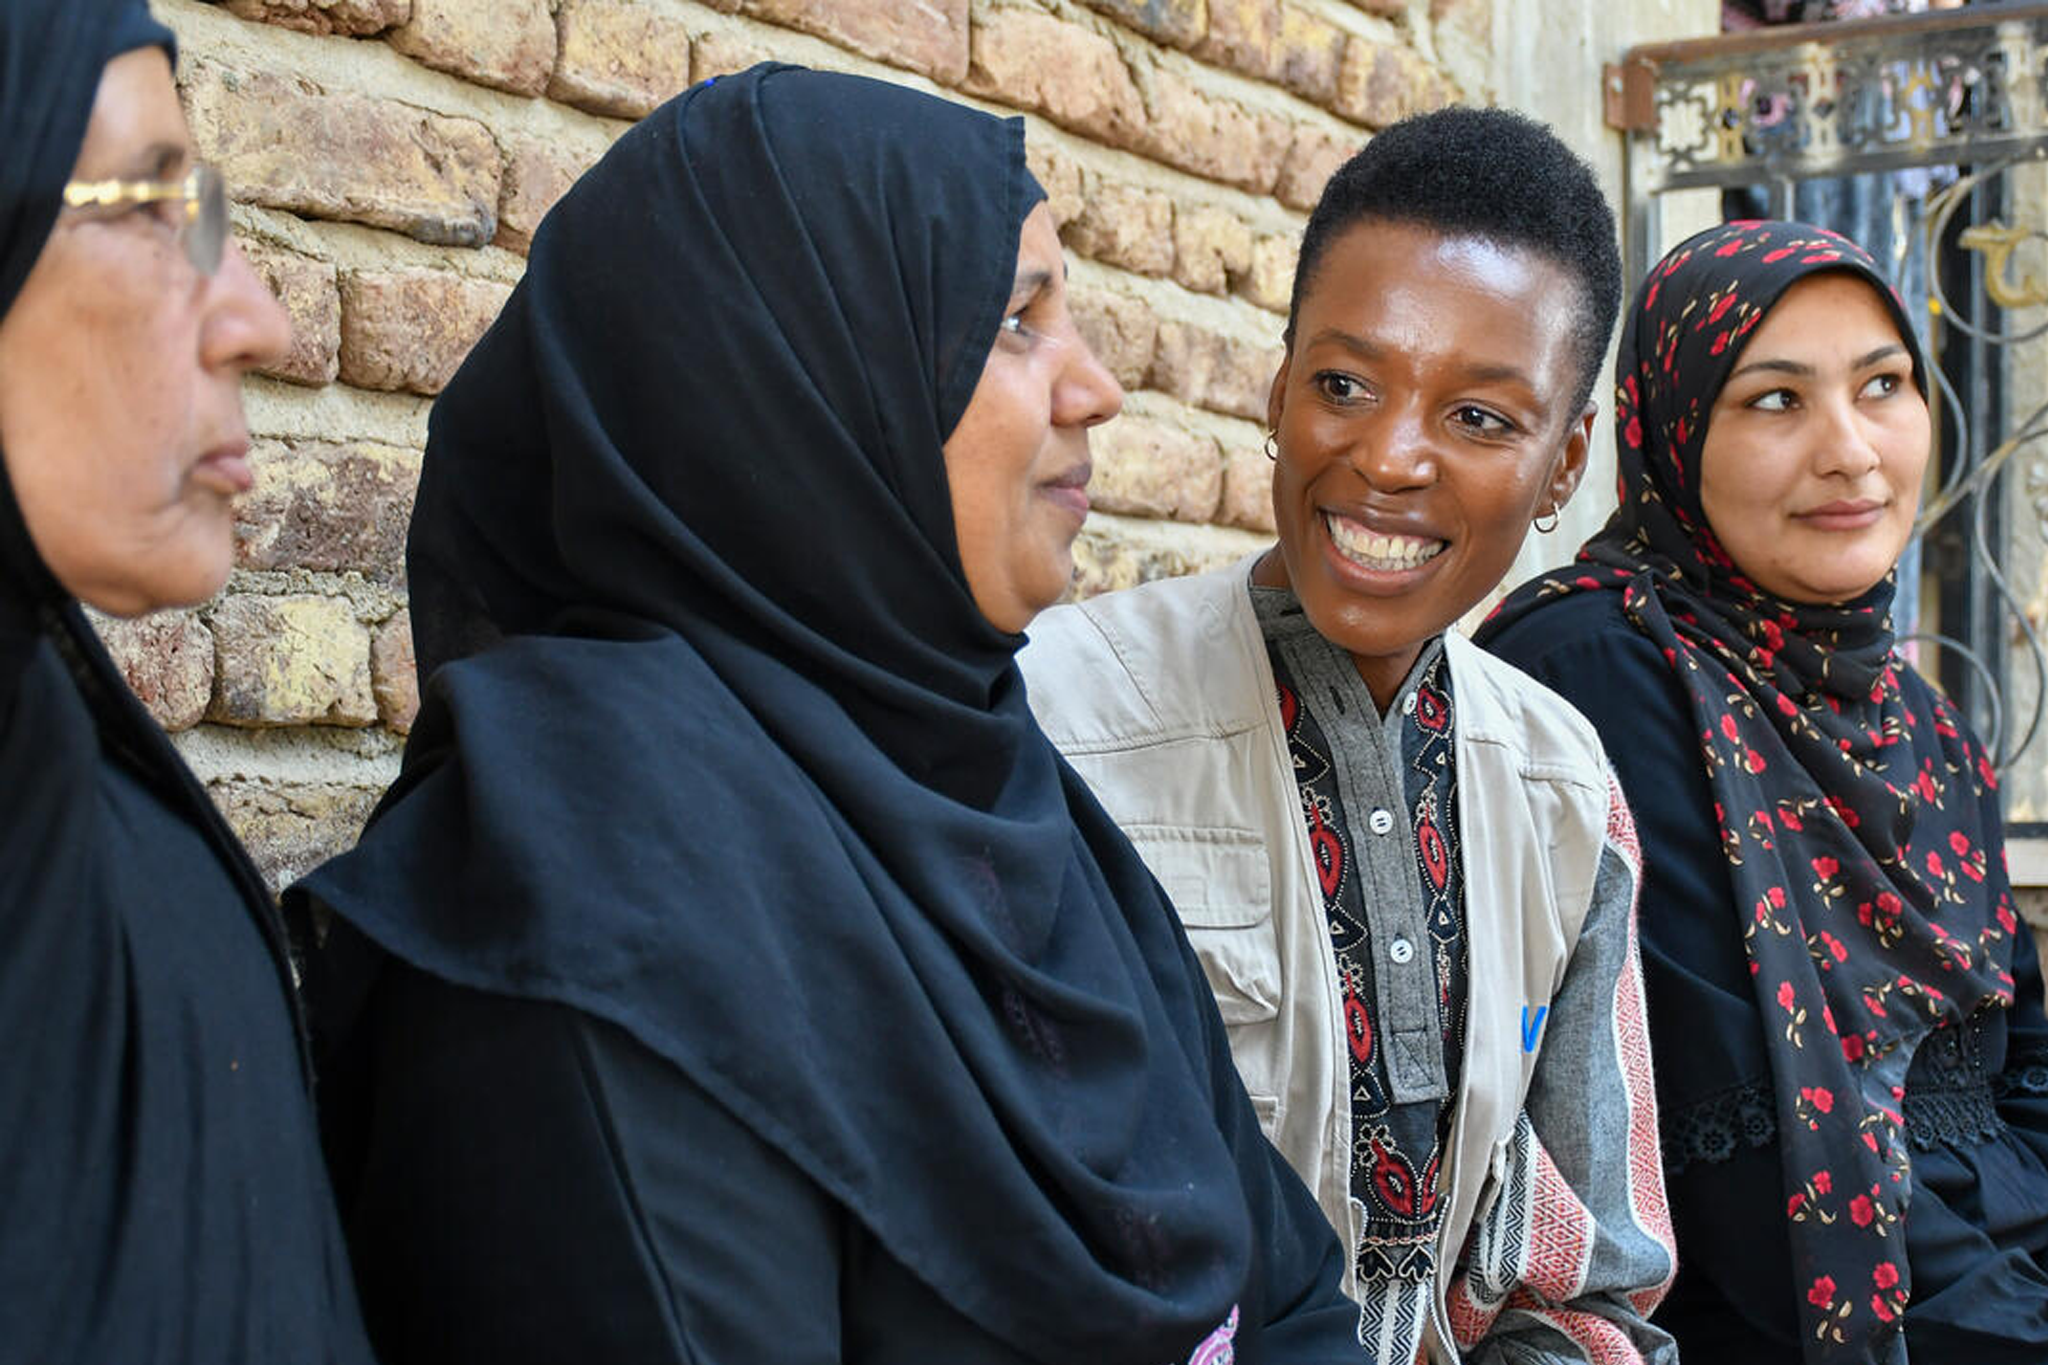 Nyamayaro (second from right) speaks to women participating in a project that grants them ‘micro-loans’ for business activities near Luxor, Egypt